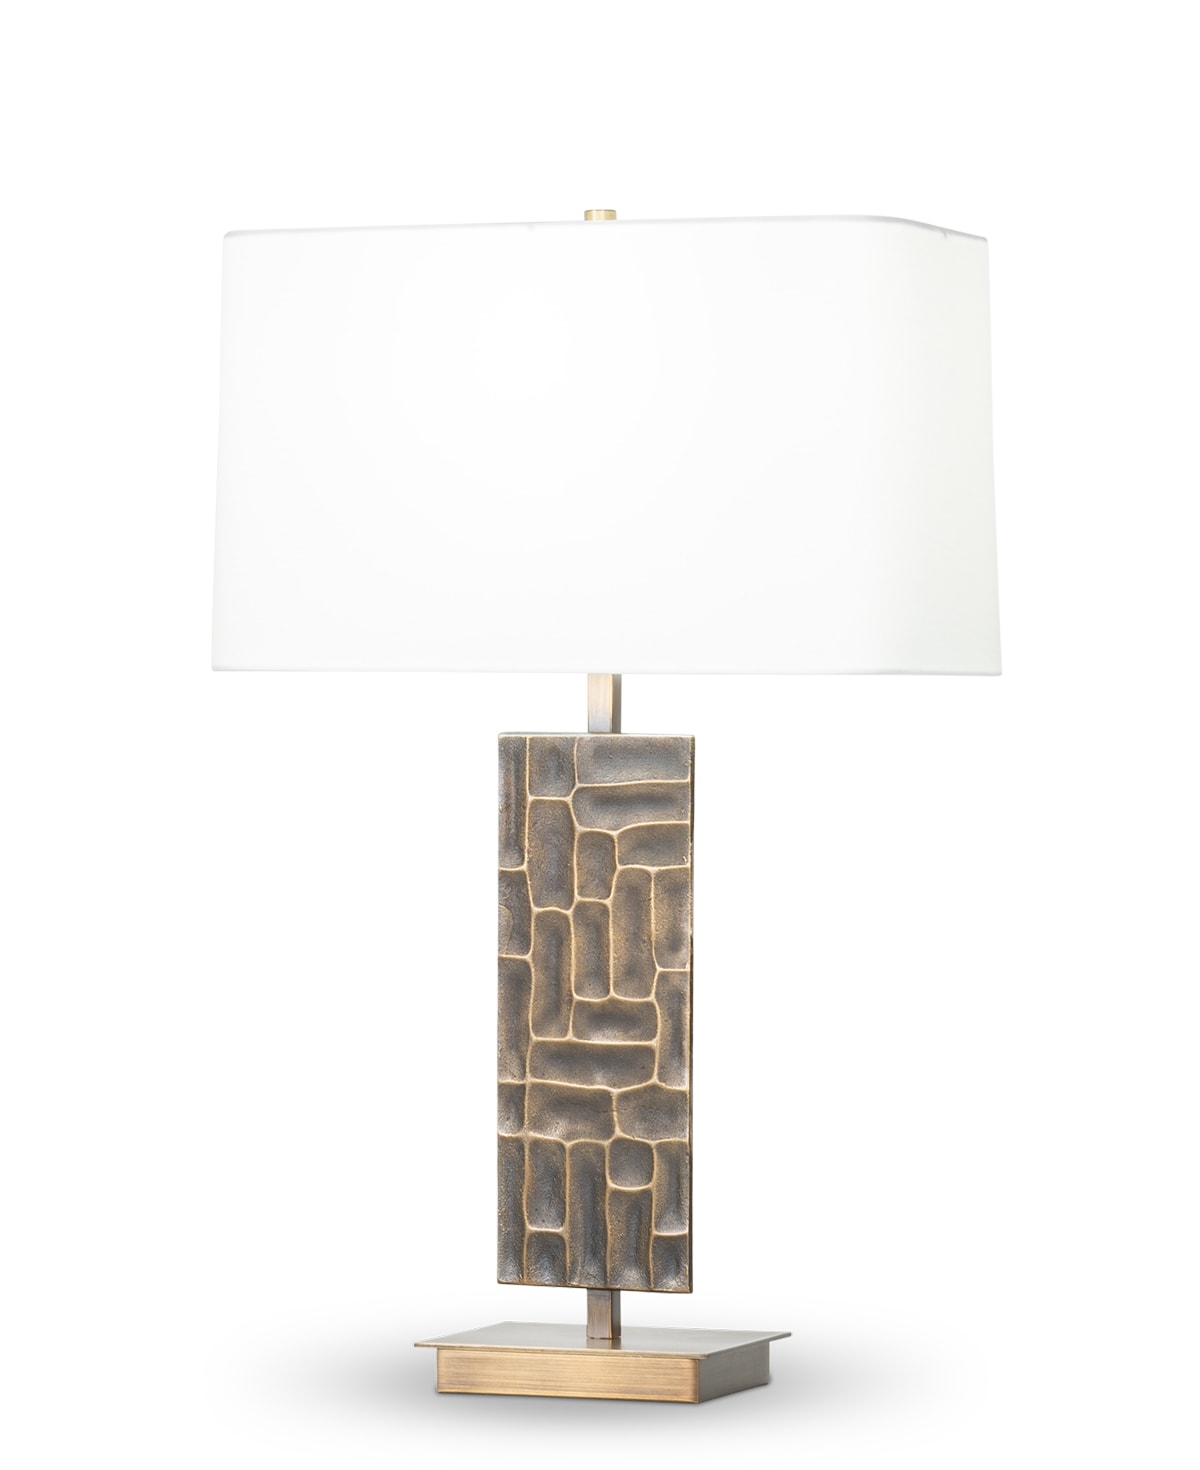 FlowDecor Rachel Table Lamp in metal with antique brass finish and off-white cotton rounded rectangle shade (# 4443)